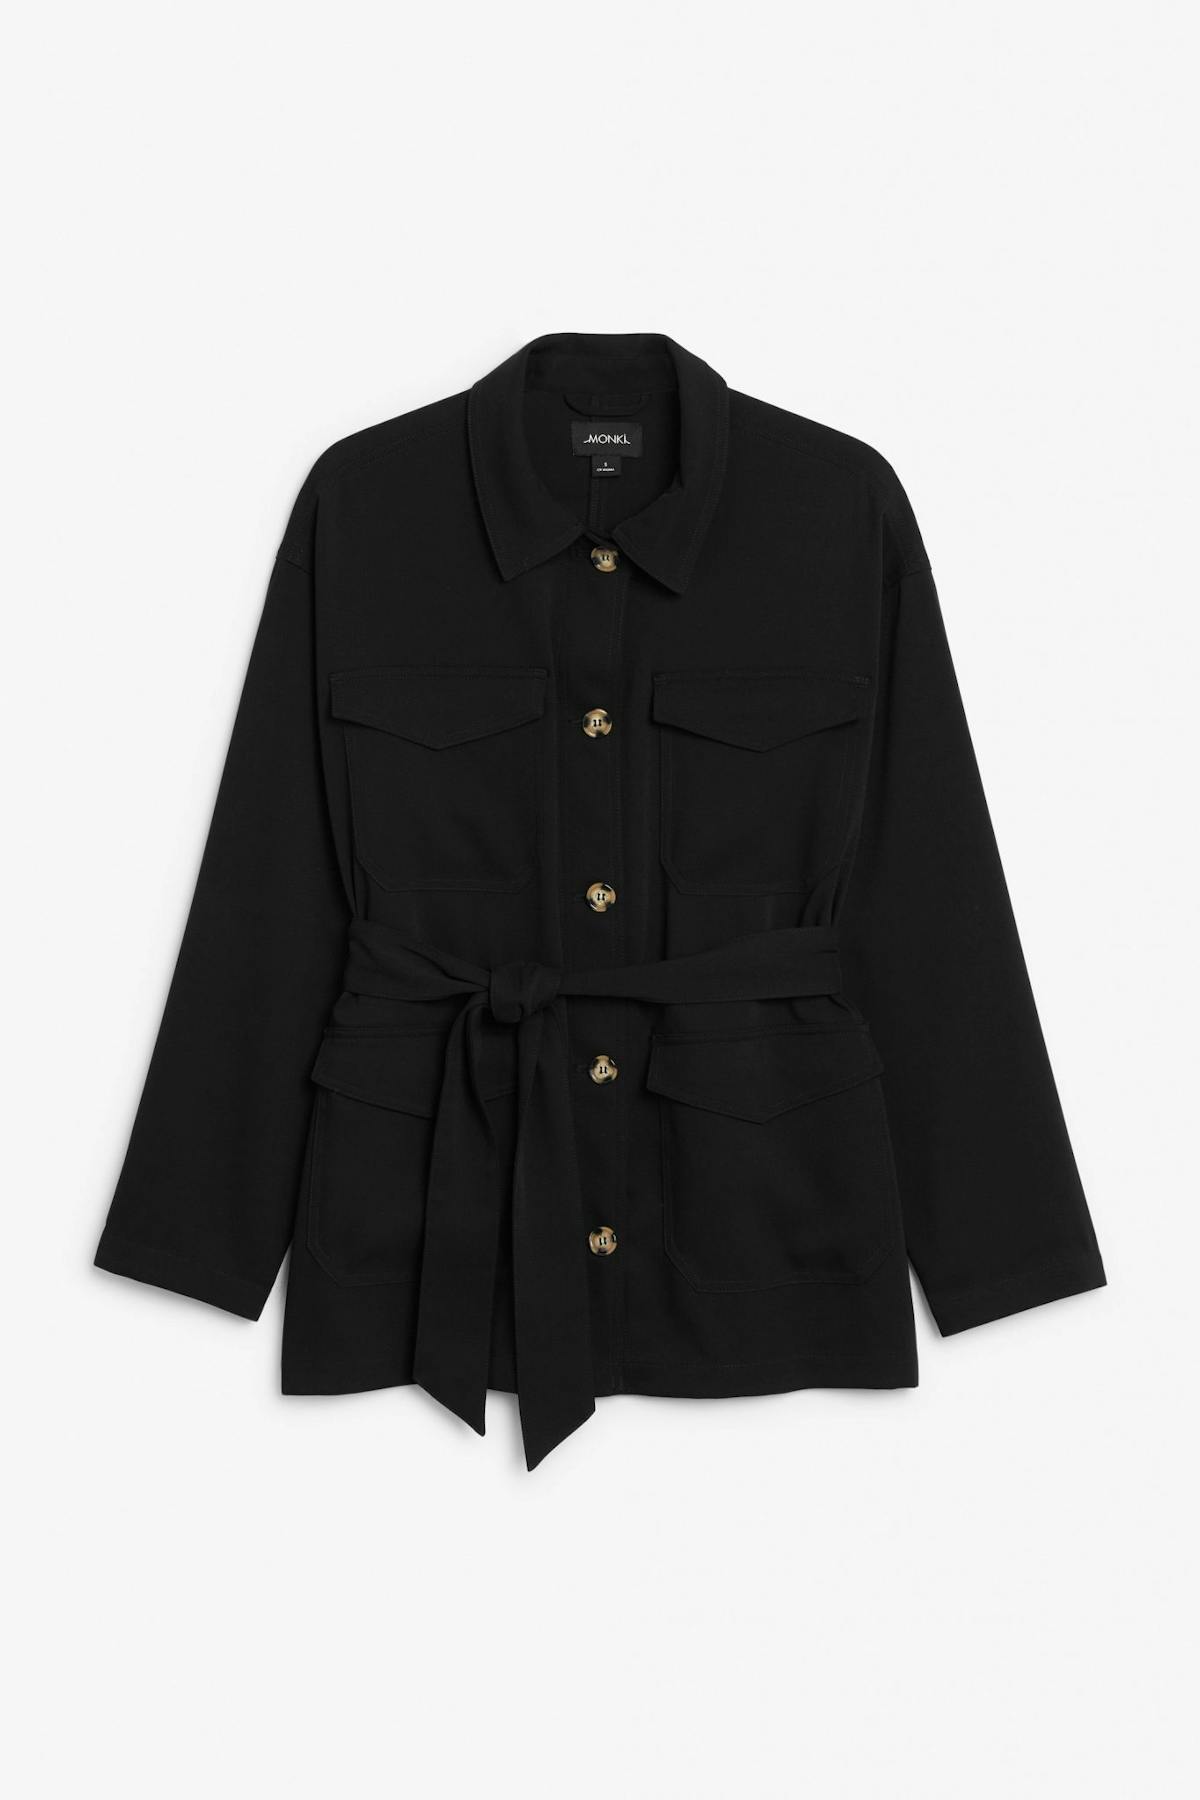 Best belted jackets to wear for autumn